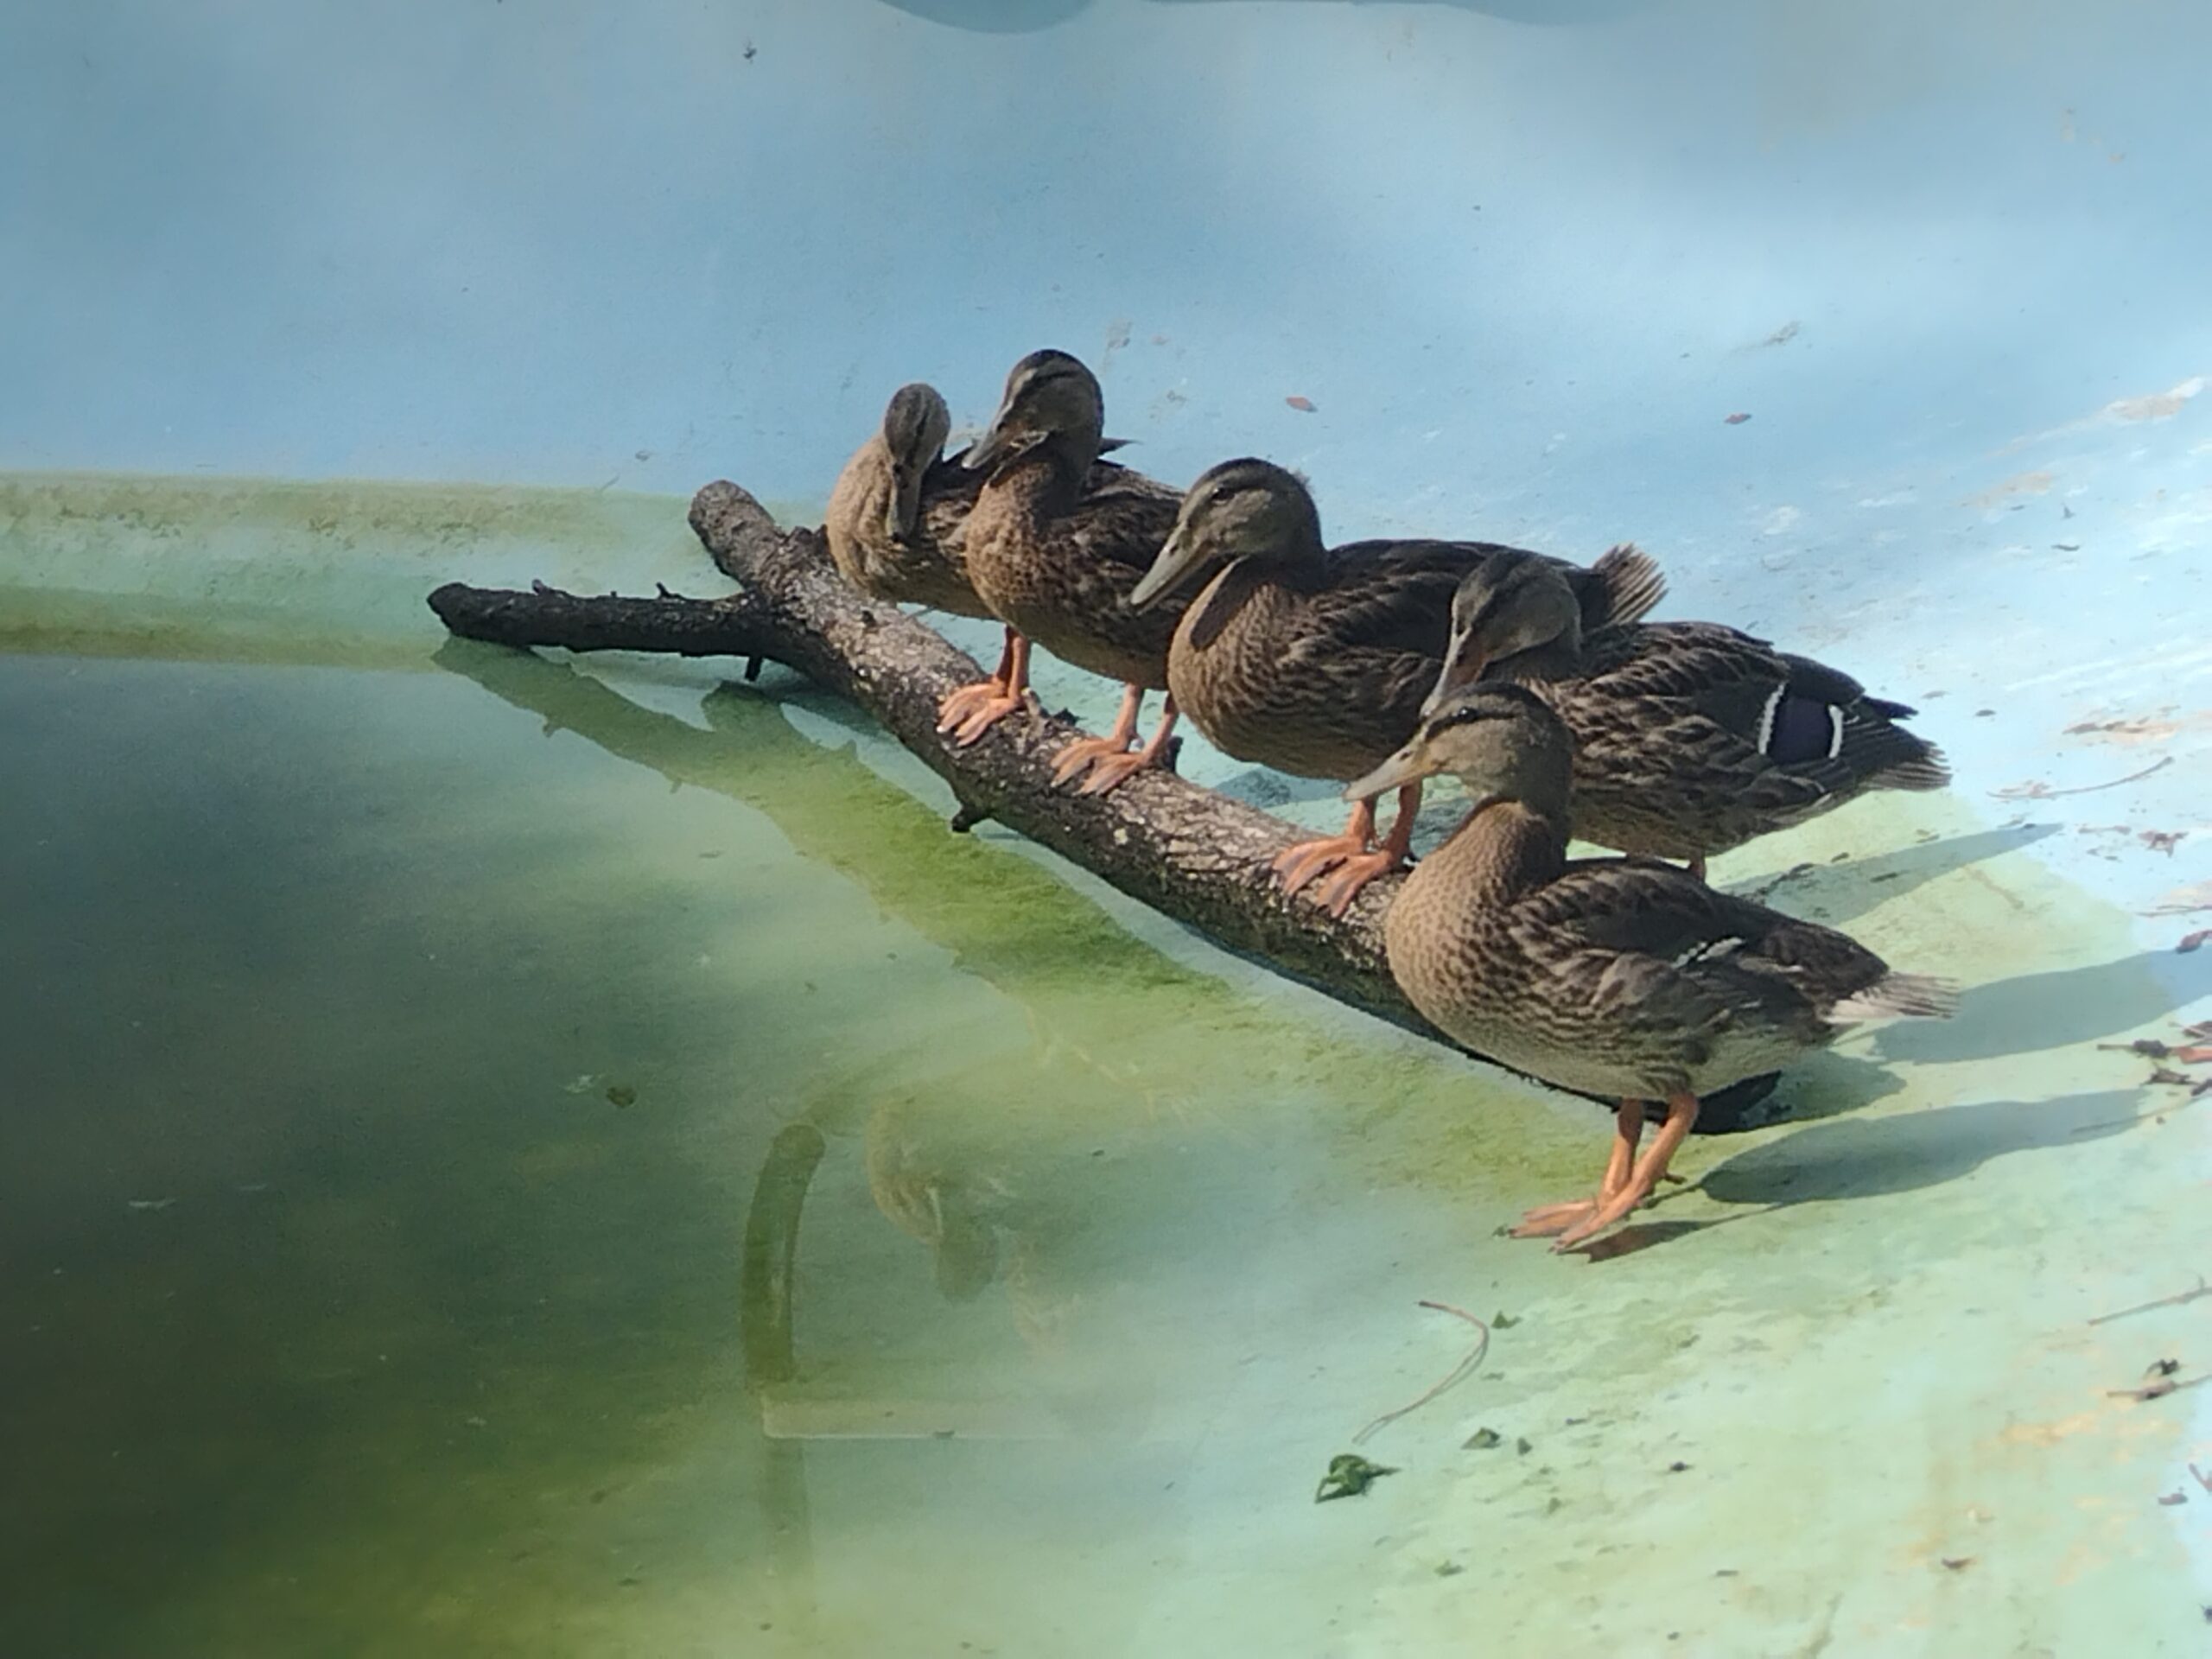 Seven ducklings took up residence in a Southampton pool last summer. COURTESY PETER ZEGLER